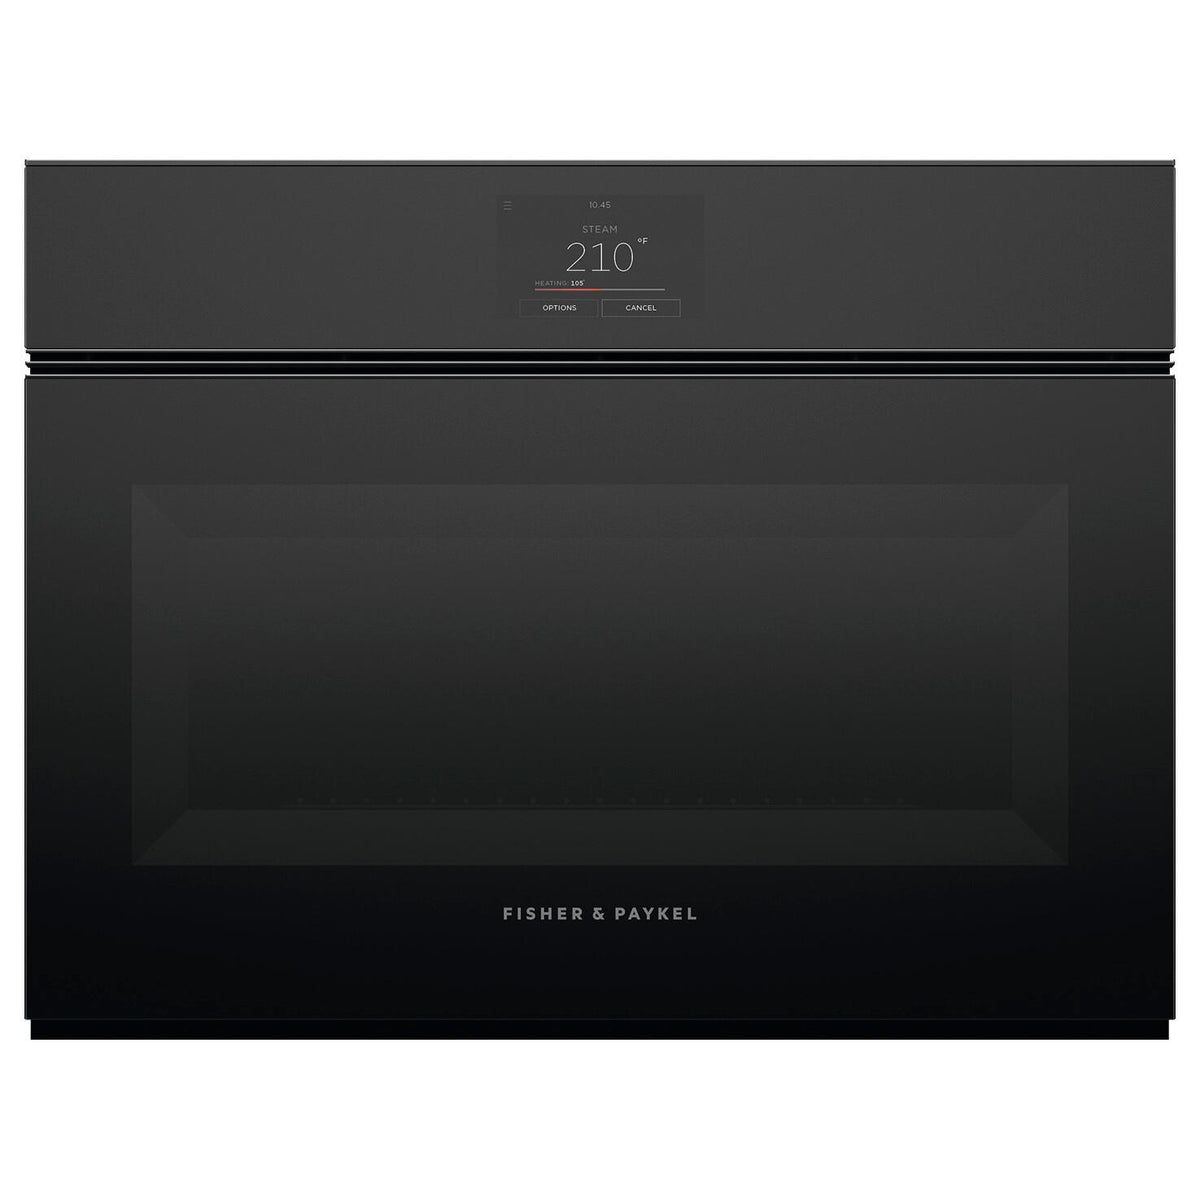 24-inch Built-in Single Wall Oven with Convection Technology OS24NMTNB1 IMAGE 1